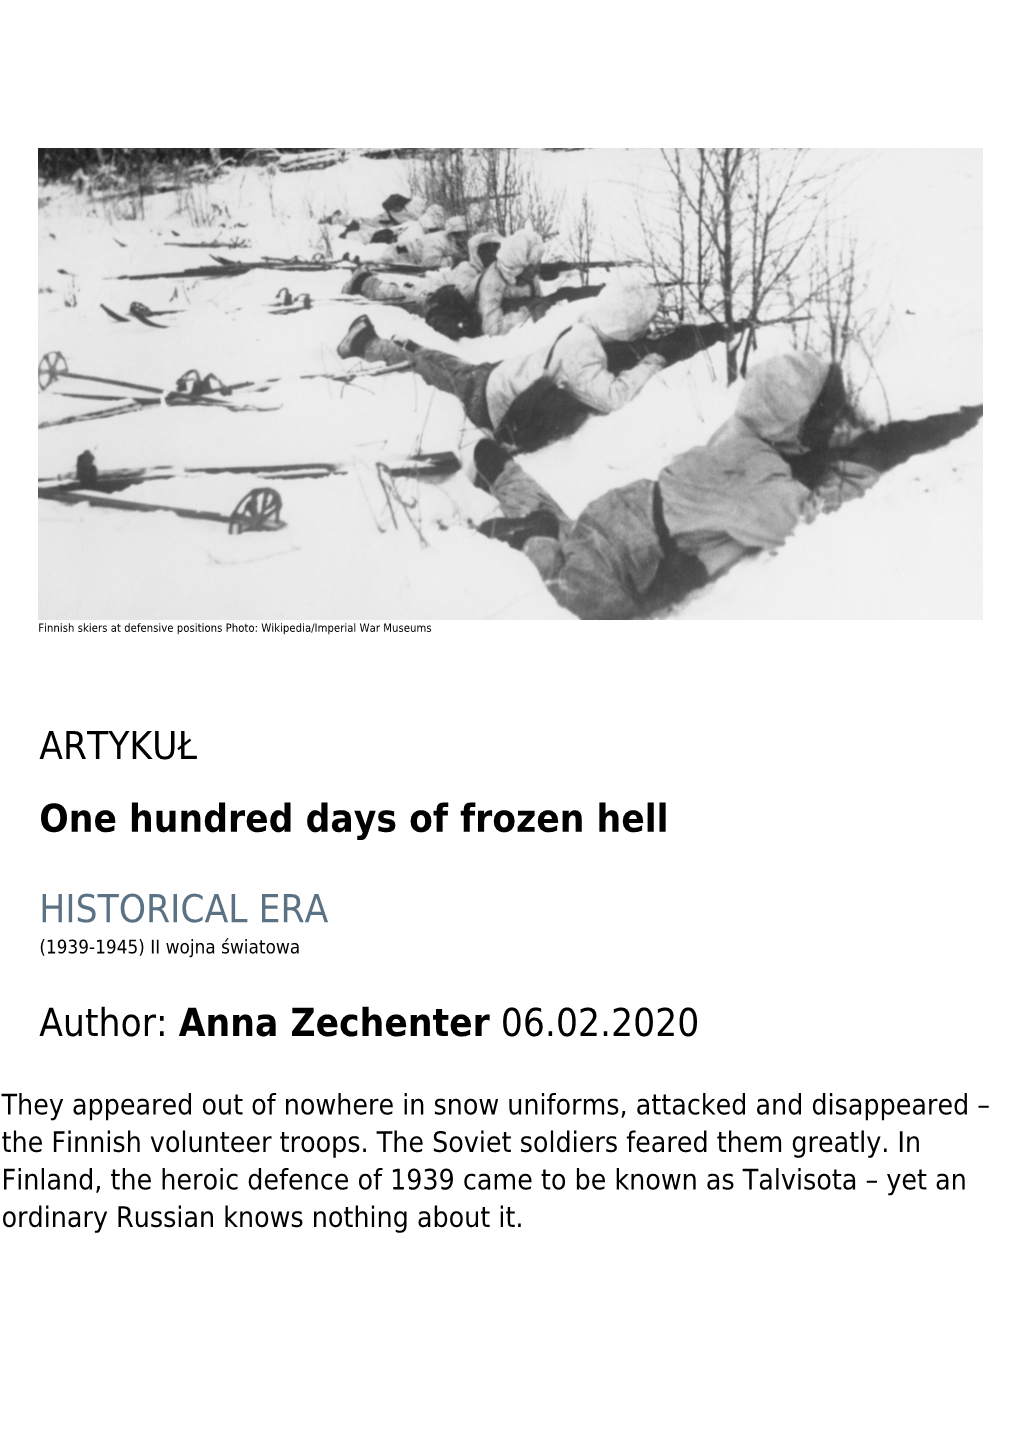 ARTYKUŁ One Hundred Days of Frozen Hell HISTORICAL ERA